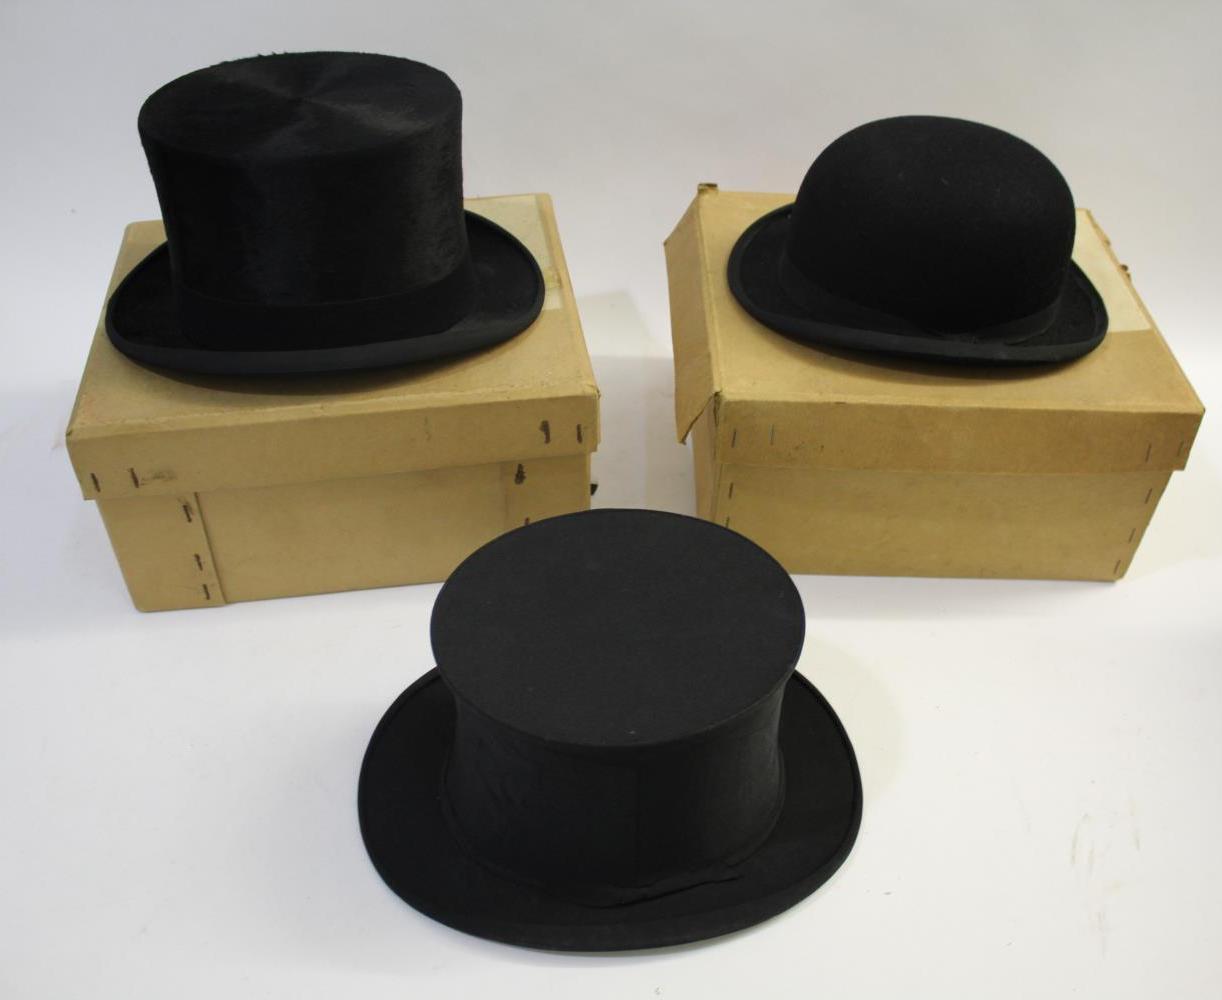 TOP HATS & BOWLER HAT including a black Top Hat by Lock & Co with box by the same maker, and a black